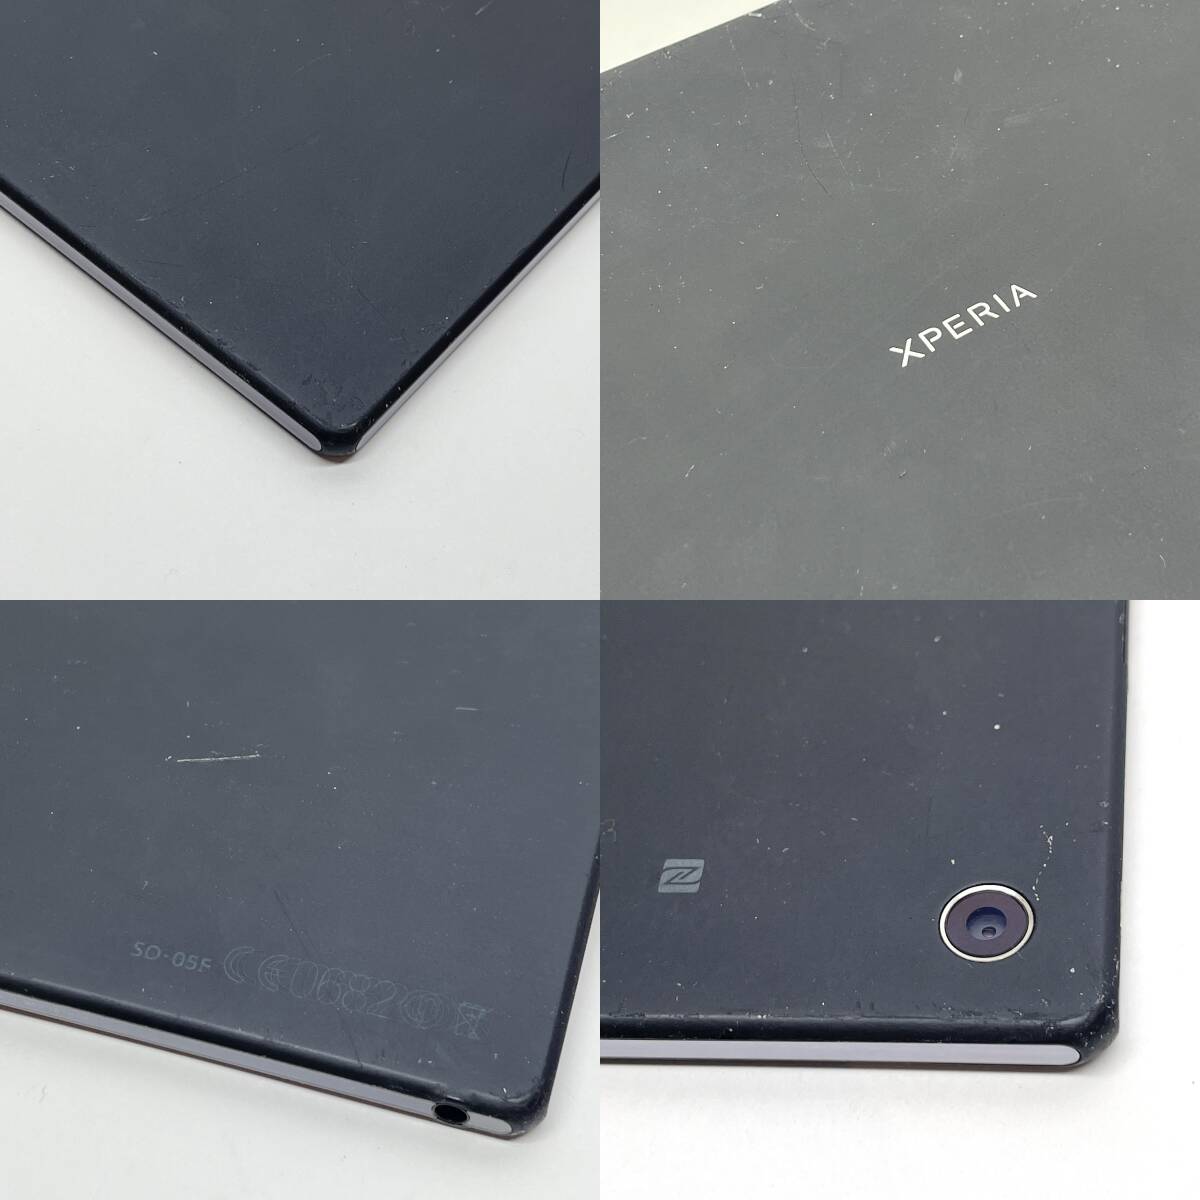 tu098 タブレット まとめ SONY ソニー XPERIA Z2 Tablet SO-05F Amazon アマゾン Fire HD 8 L5S83A 計5点 ※ジャンク_画像6